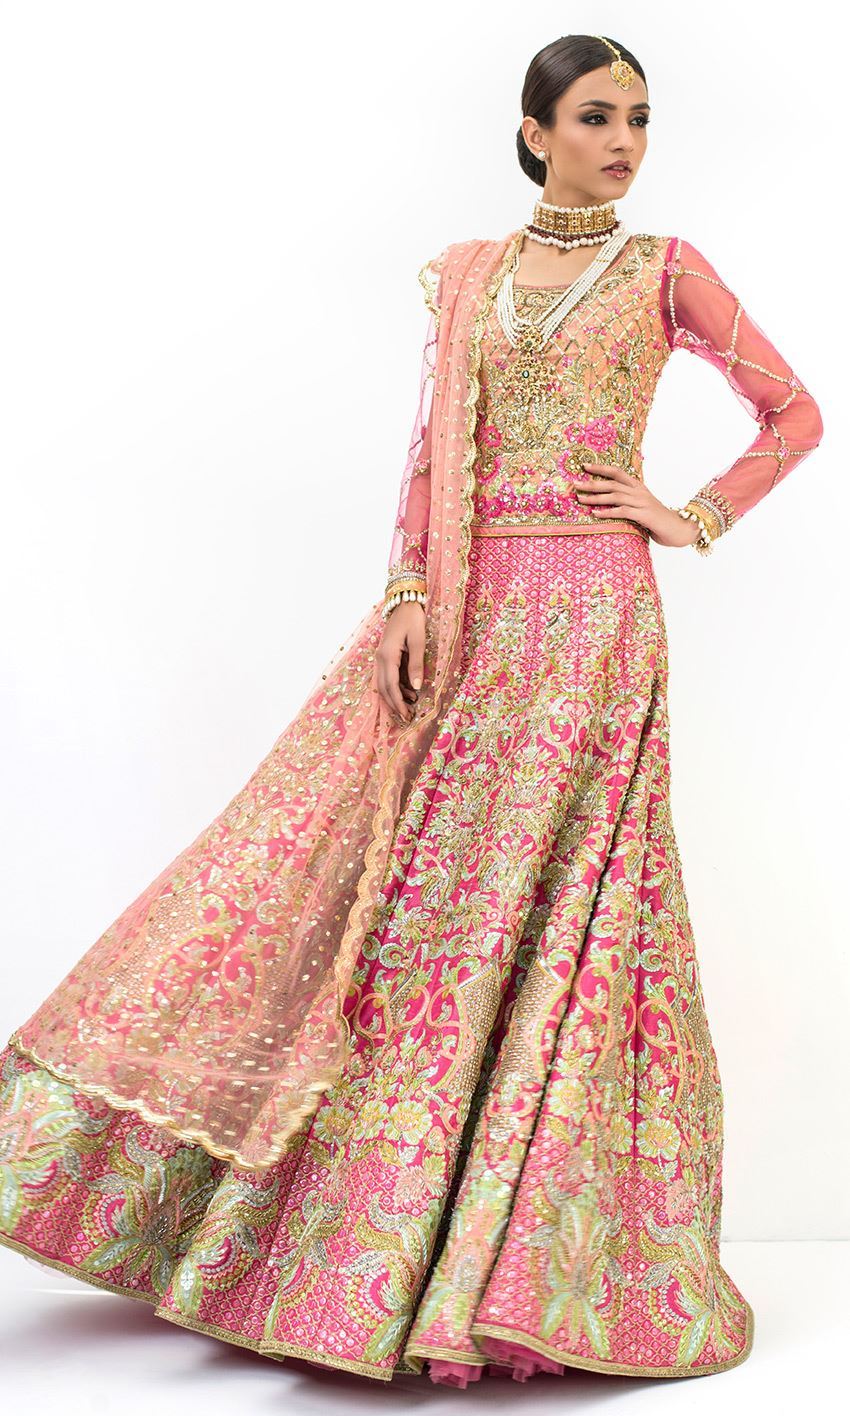 Heavily Embellished Pink Color Wedding Lehenga by Panache Haute Couture